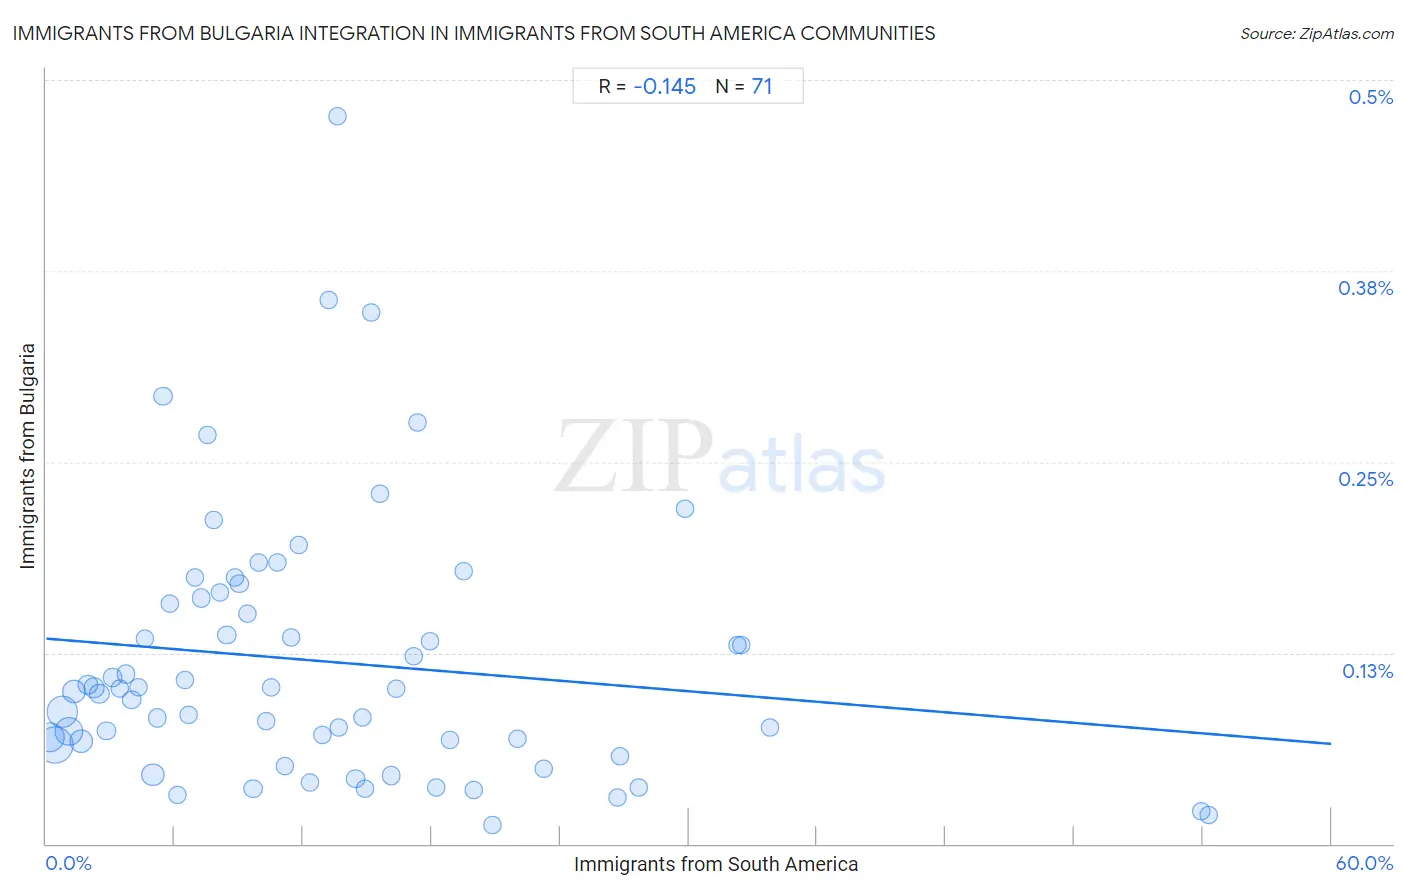 Immigrants from South America Integration in Immigrants from Bulgaria Communities